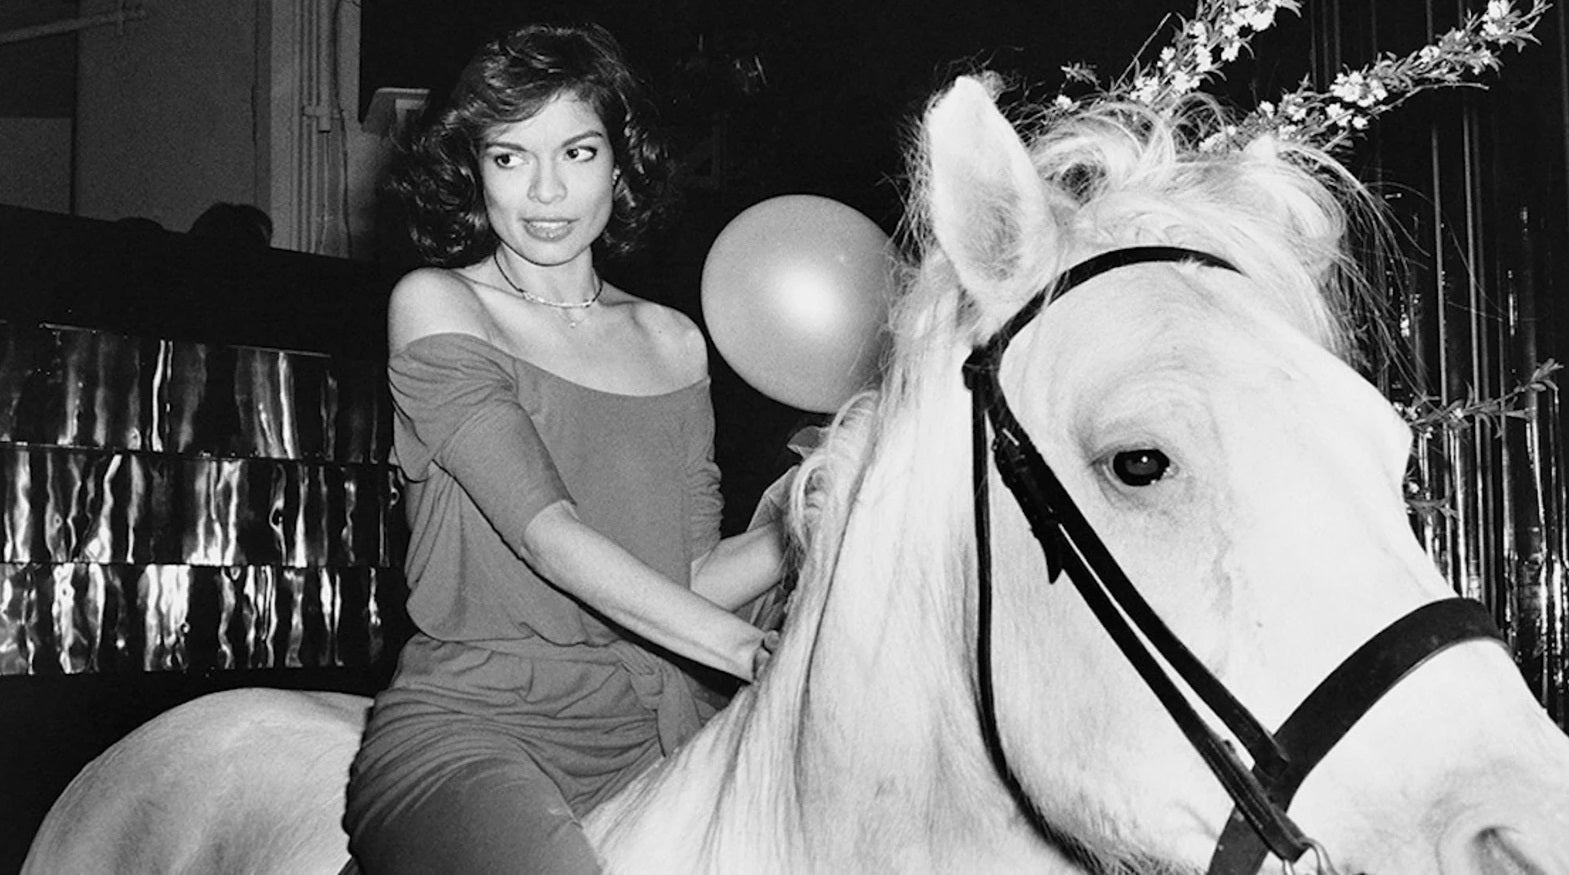 women's fashion of the 70s ideas: bianca jagger off the shoulder top